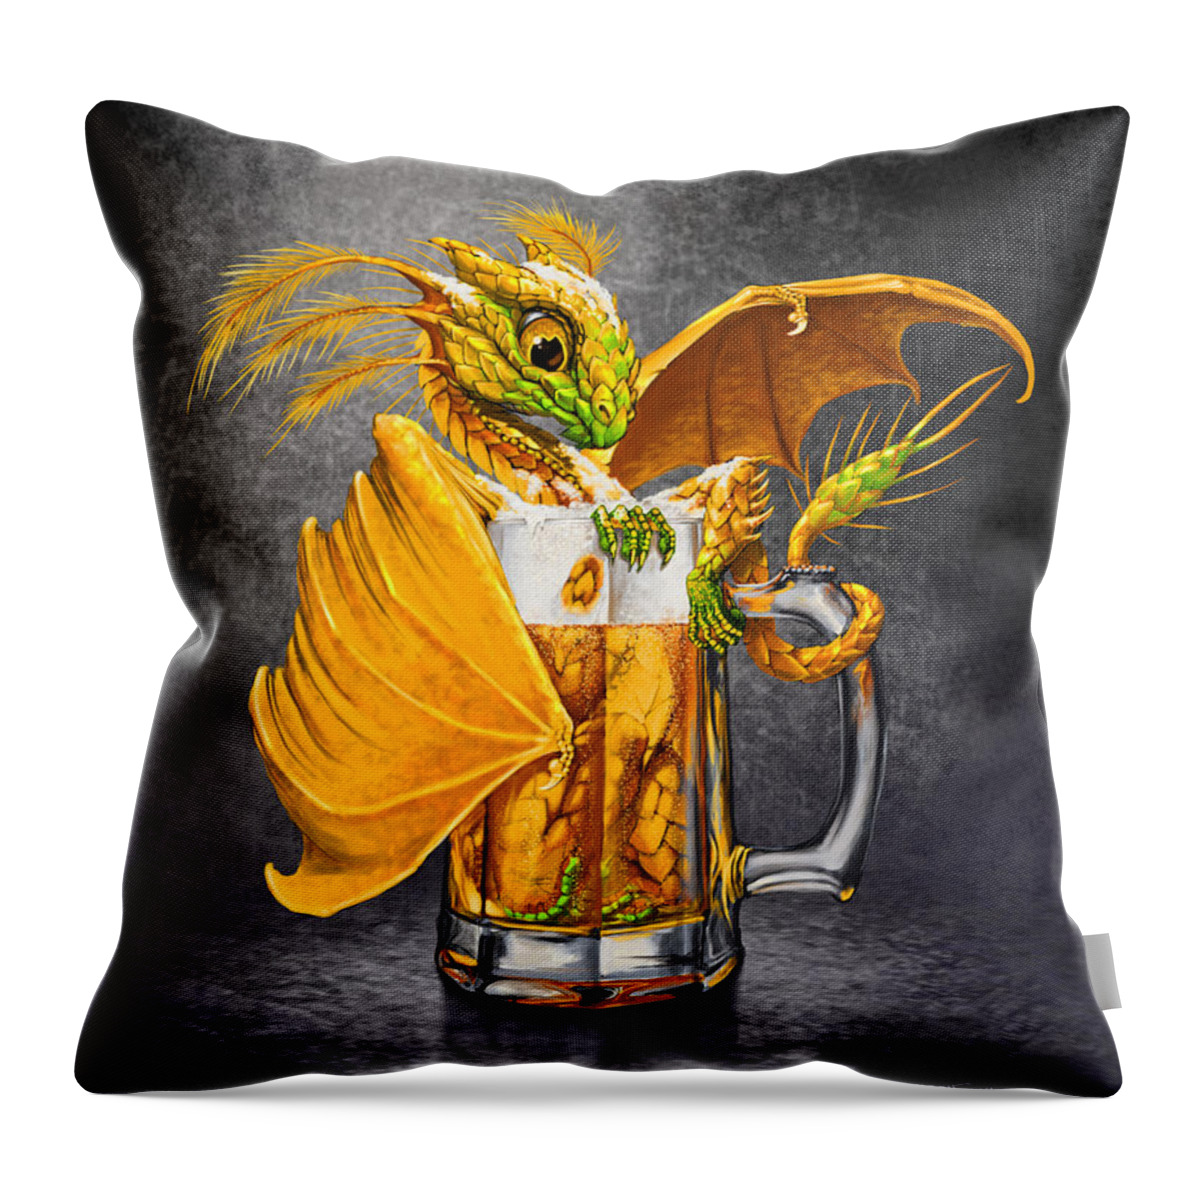 Dragon Throw Pillow featuring the digital art Beer Dragon by Stanley Morrison